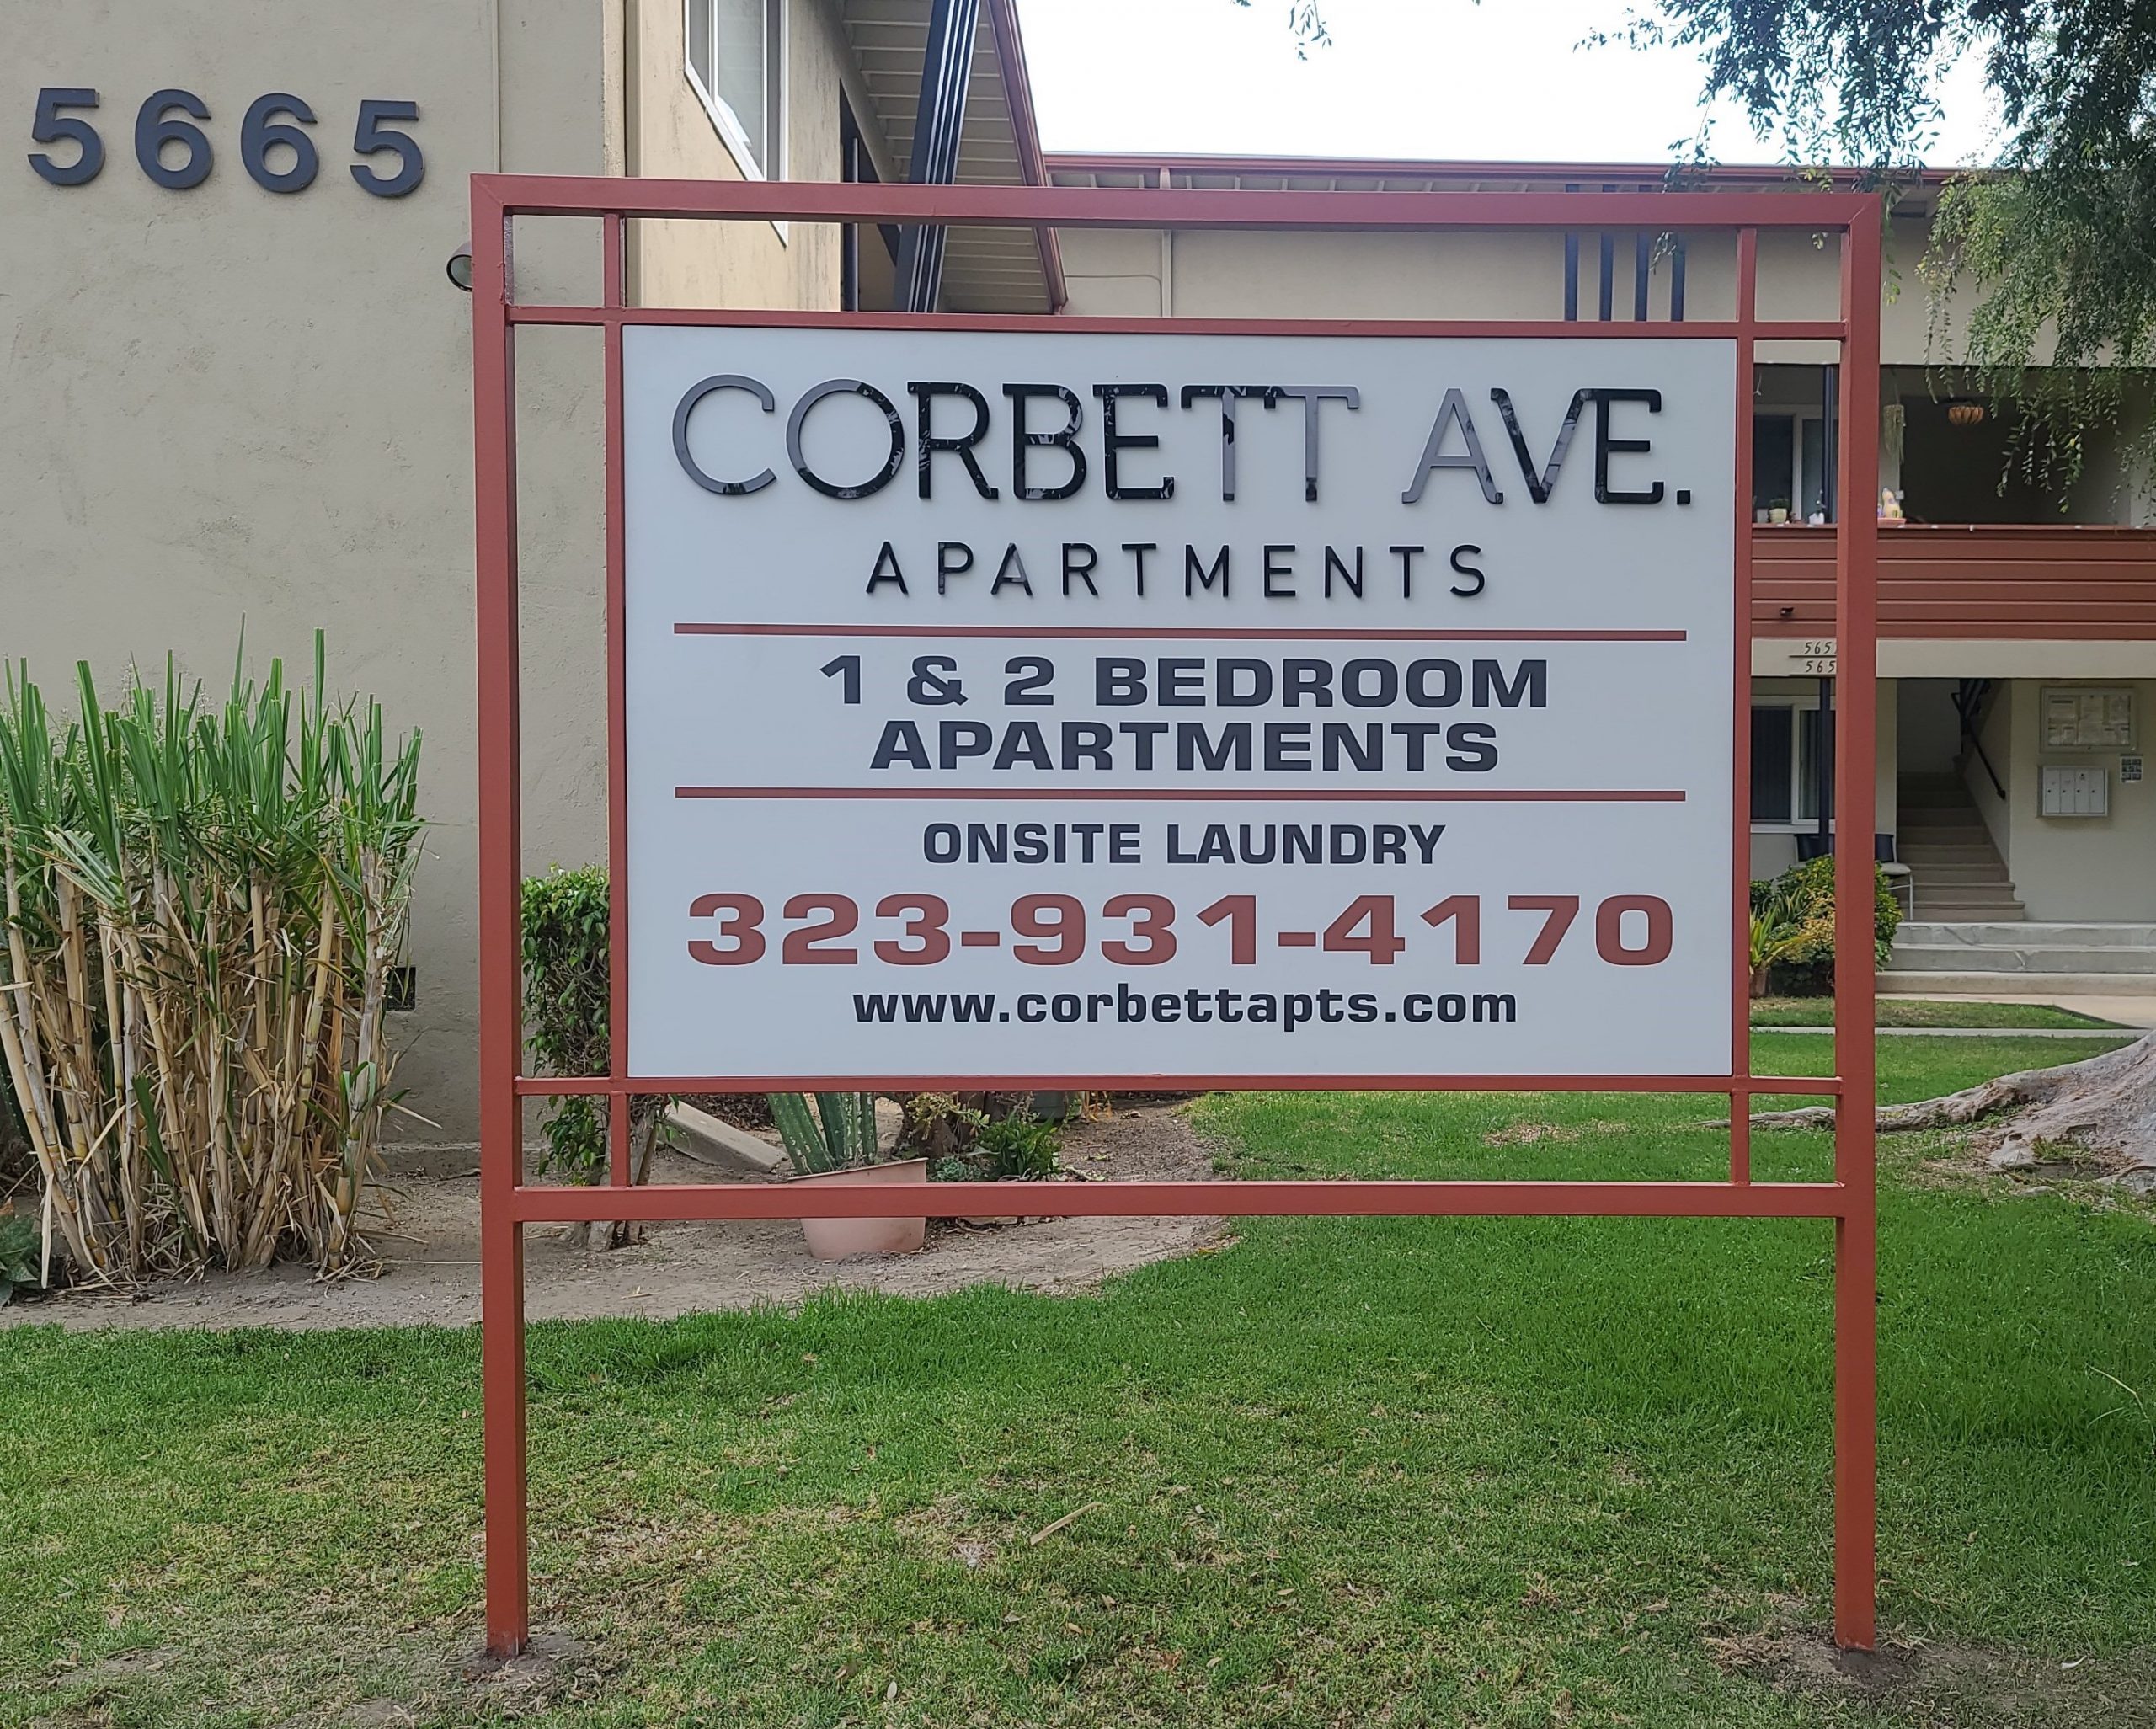 This post and panel apartment sign we fabricated and installed for Jones and Jones shows off their property in Corbett Avenue, Los Angeles,